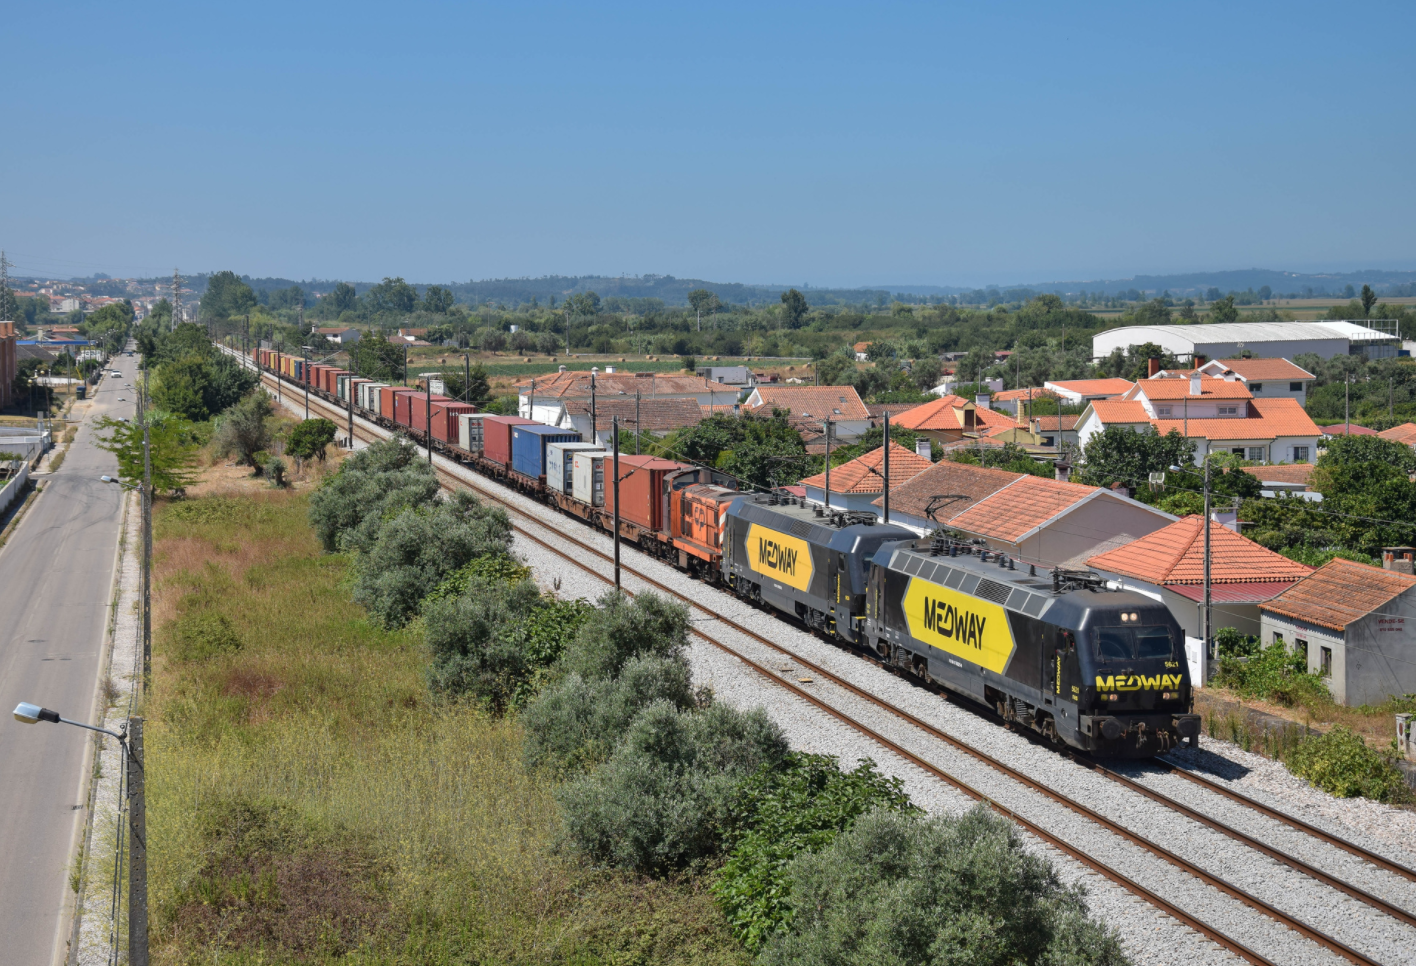 Medway freight train in Formosella, Portugal